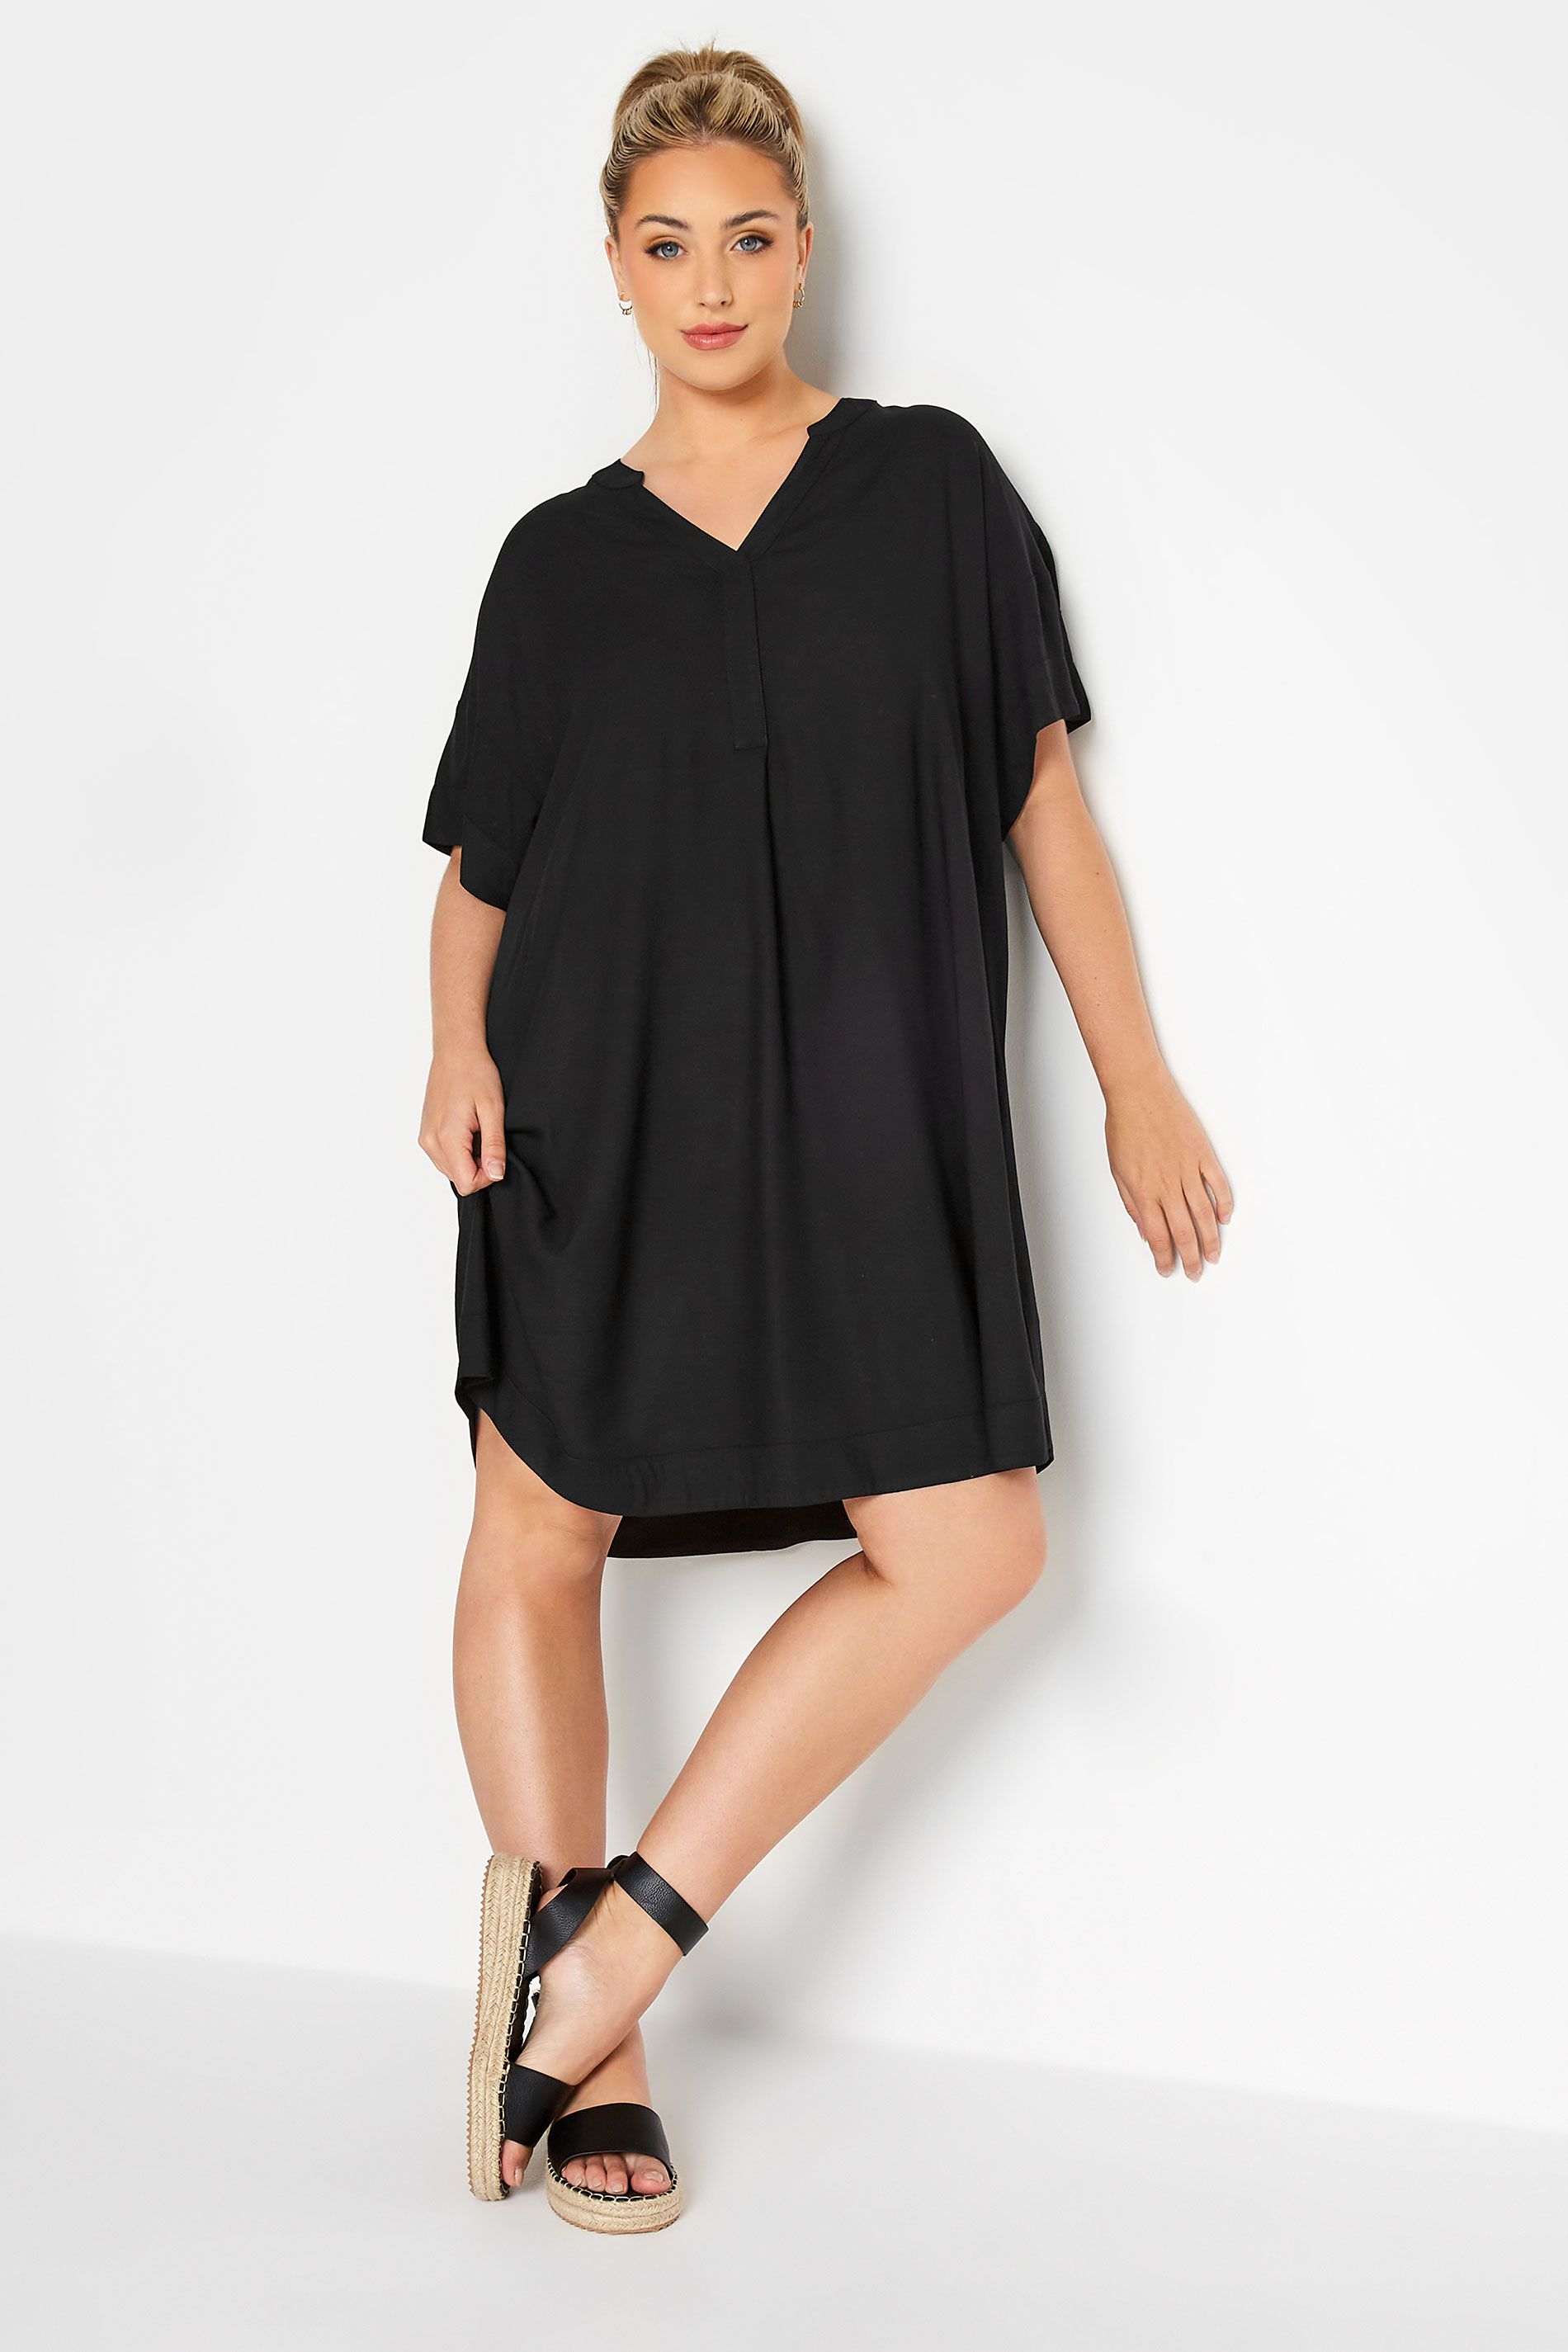 Robes Grande Taille Grande taille  Robes Casual | LIMITED COLLECTION - Robe Noire Style Chemisier - JM75091